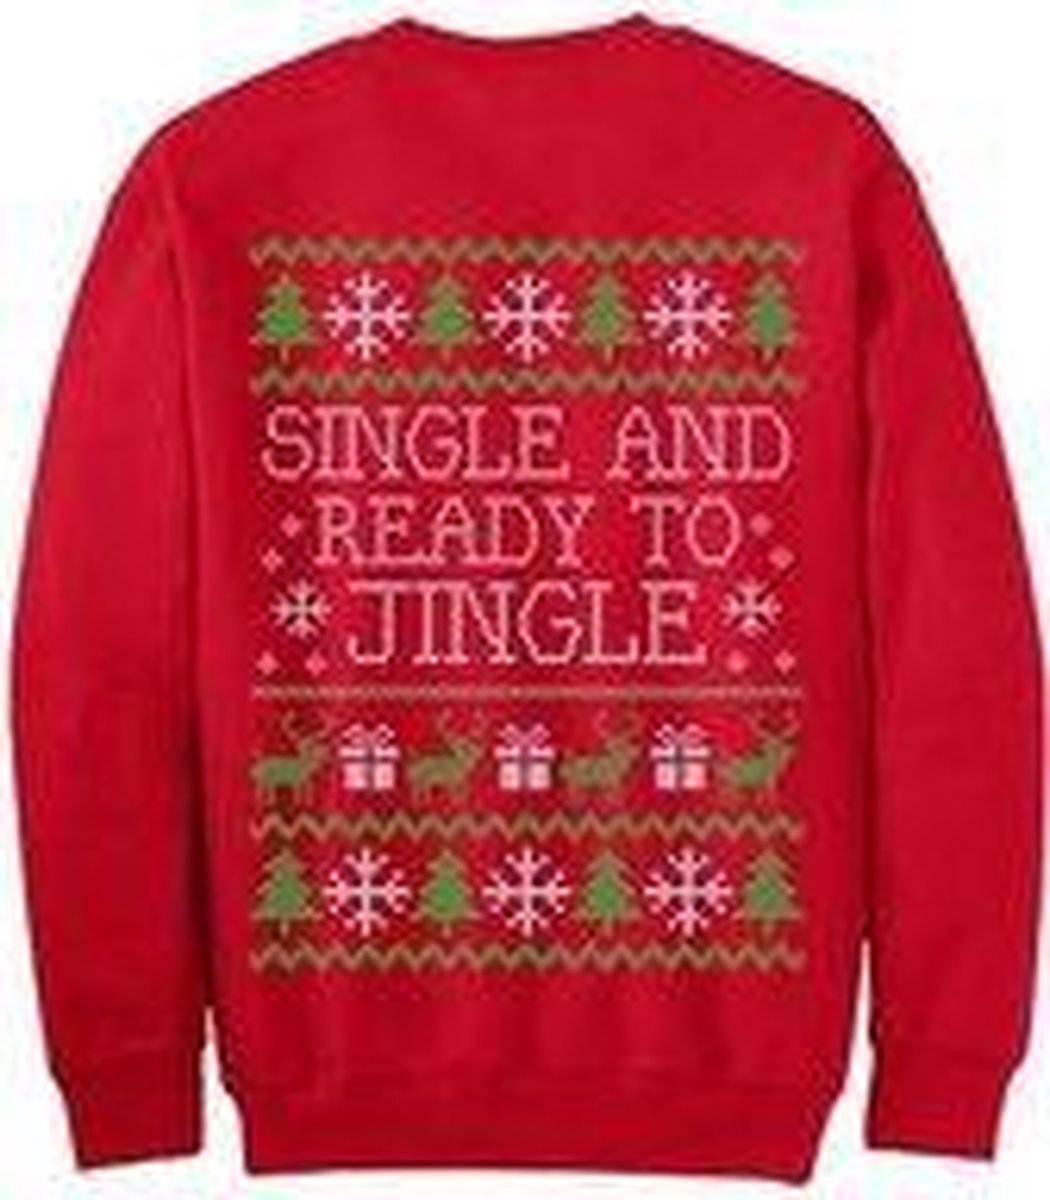 Foute Kersttrui - Christmas Sweater - Single ready to jingle - Rood/red - XXL